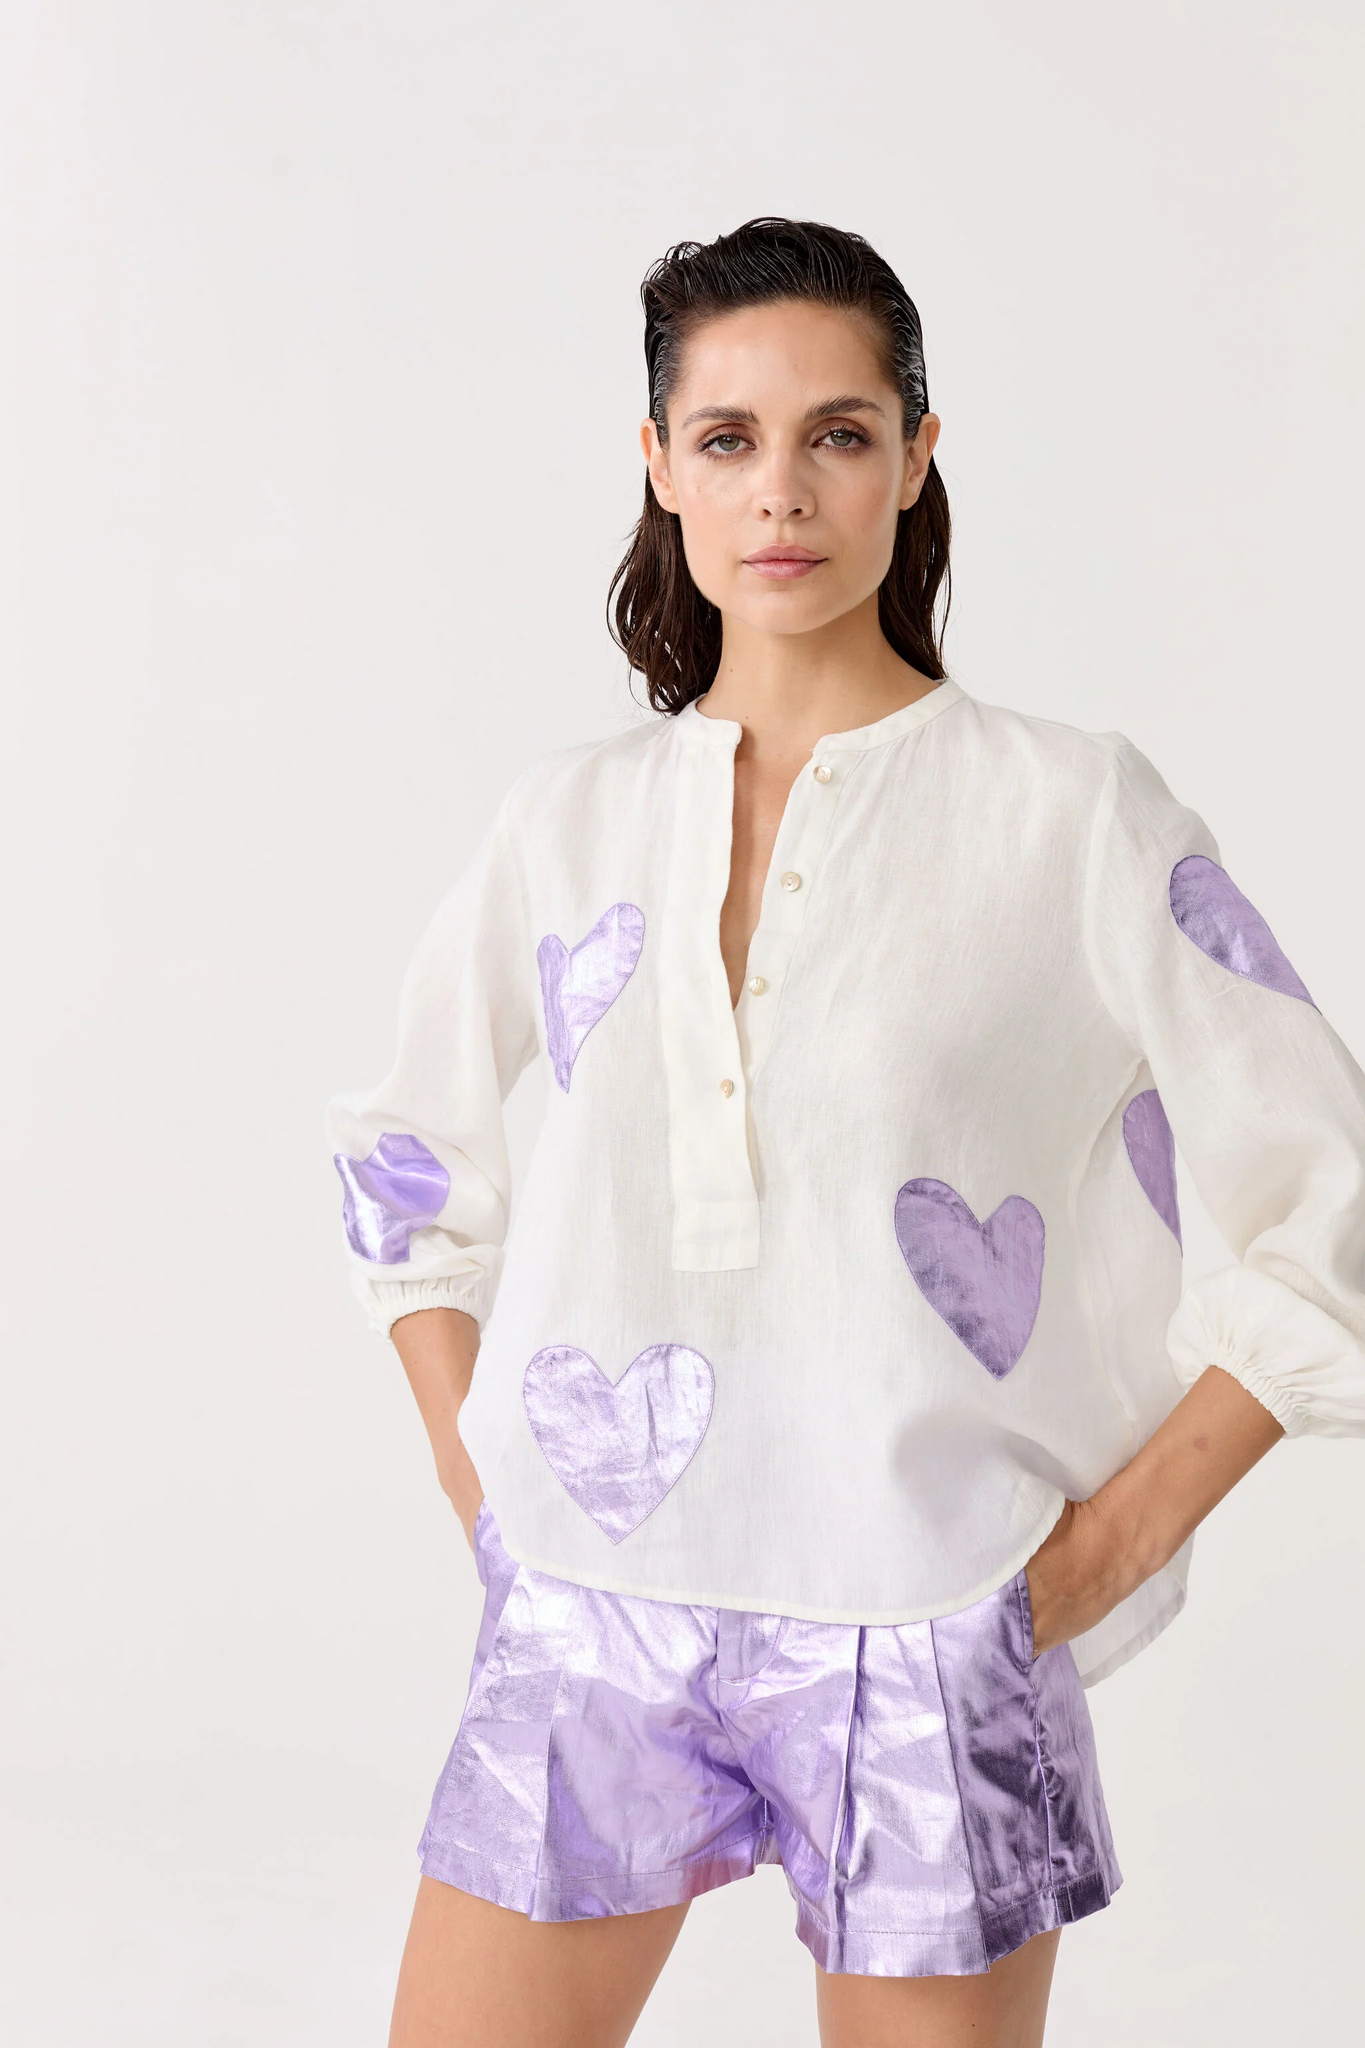 Cupid Linen Shirt - Off-white with Metallic Violet Hearts